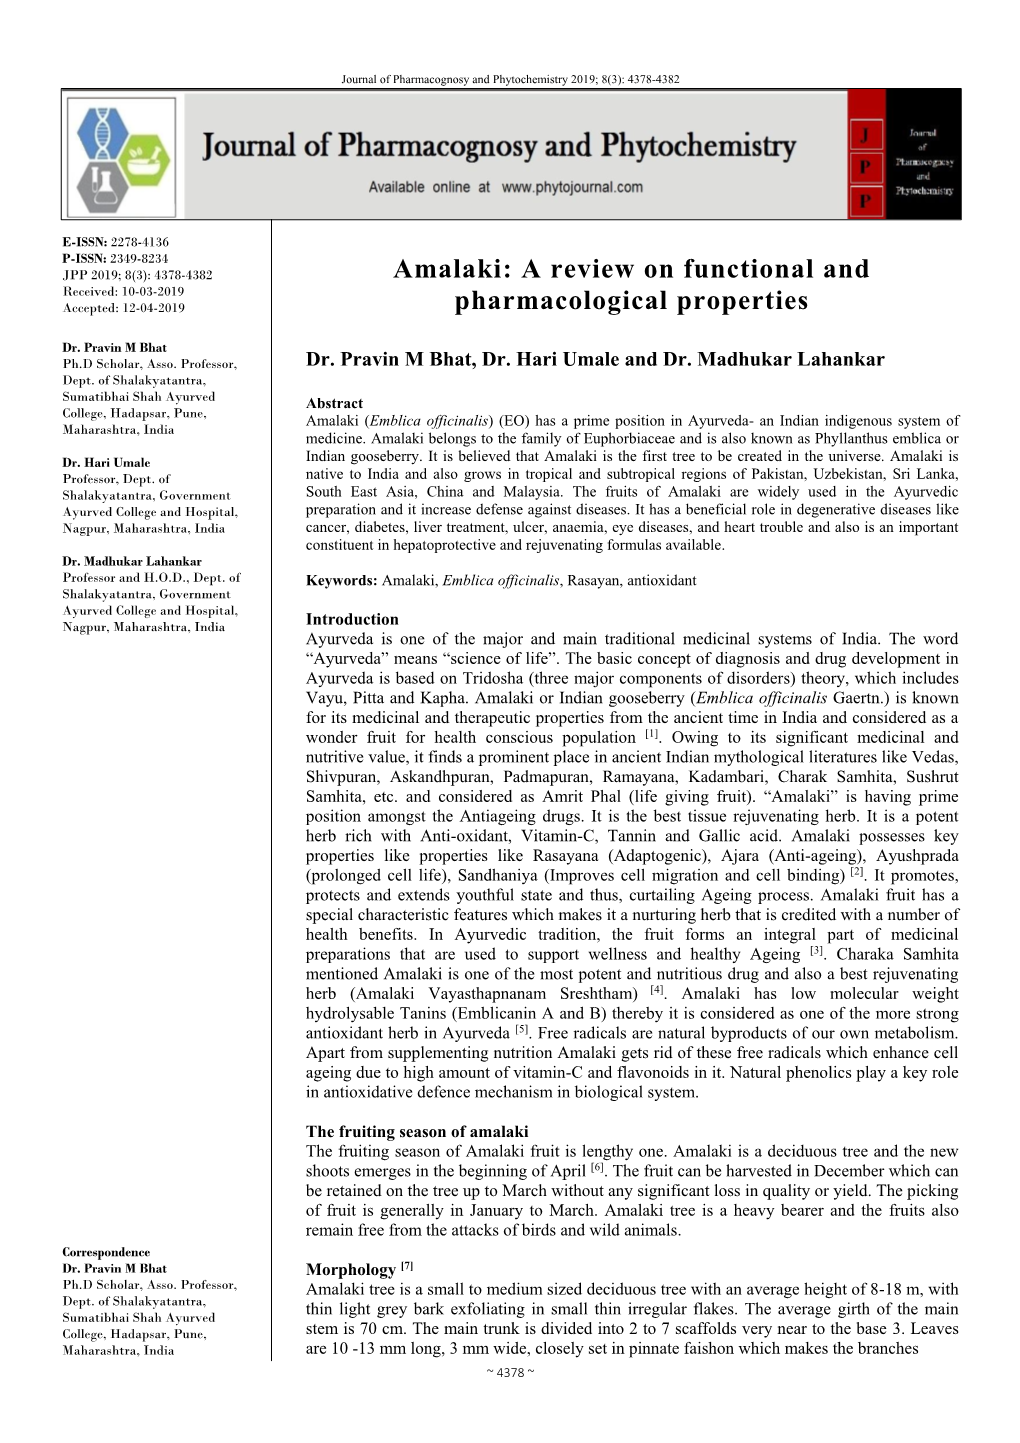 Amalaki: a Review on Functional and Received: 10-03-2019 Accepted: 12-04-2019 Pharmacological Properties